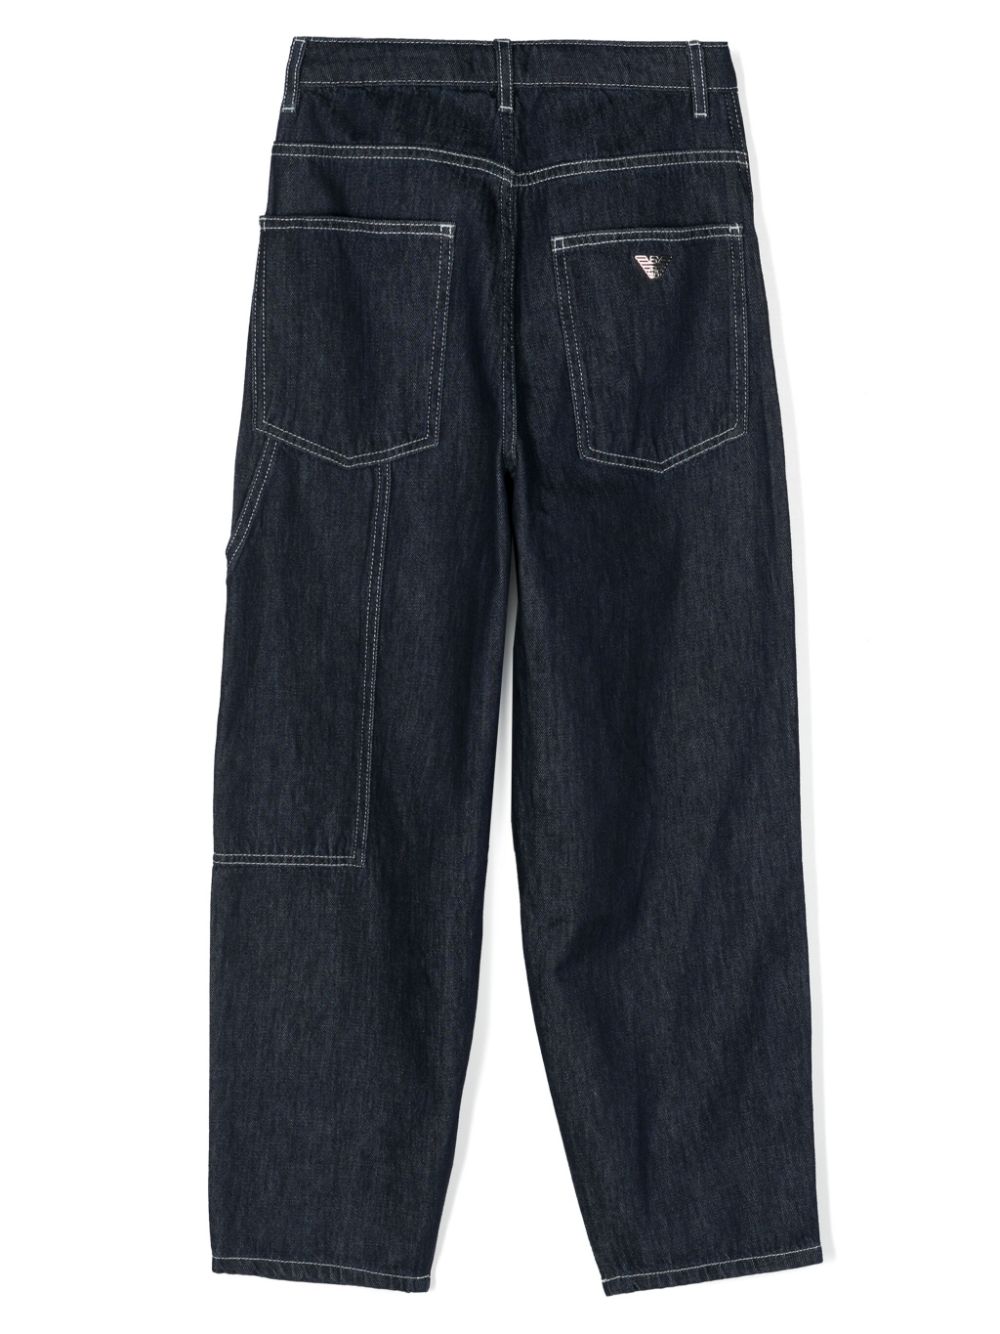 J95 TAPERED JEANS